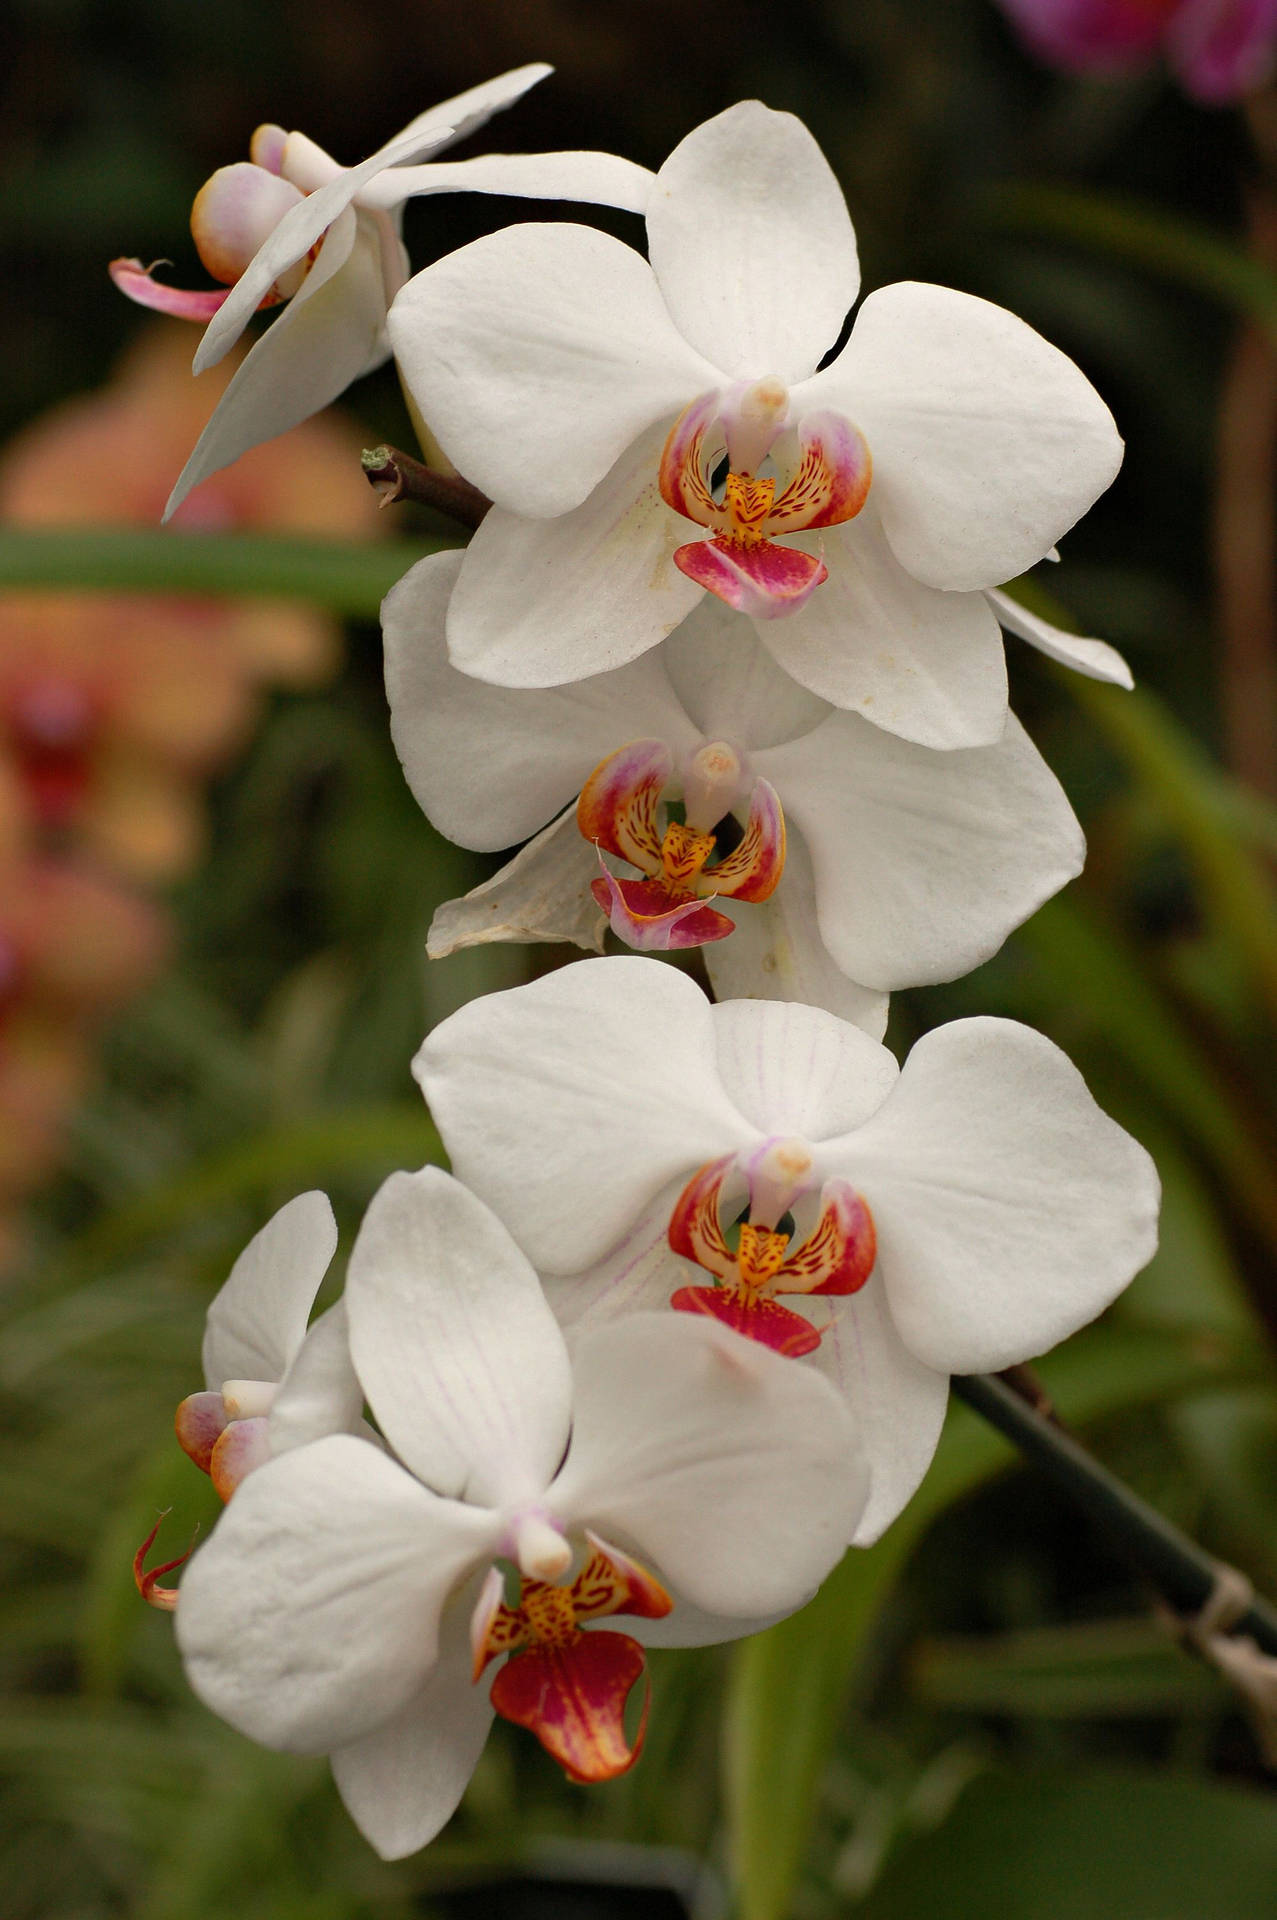 White Orchids With Red Center Petals Background